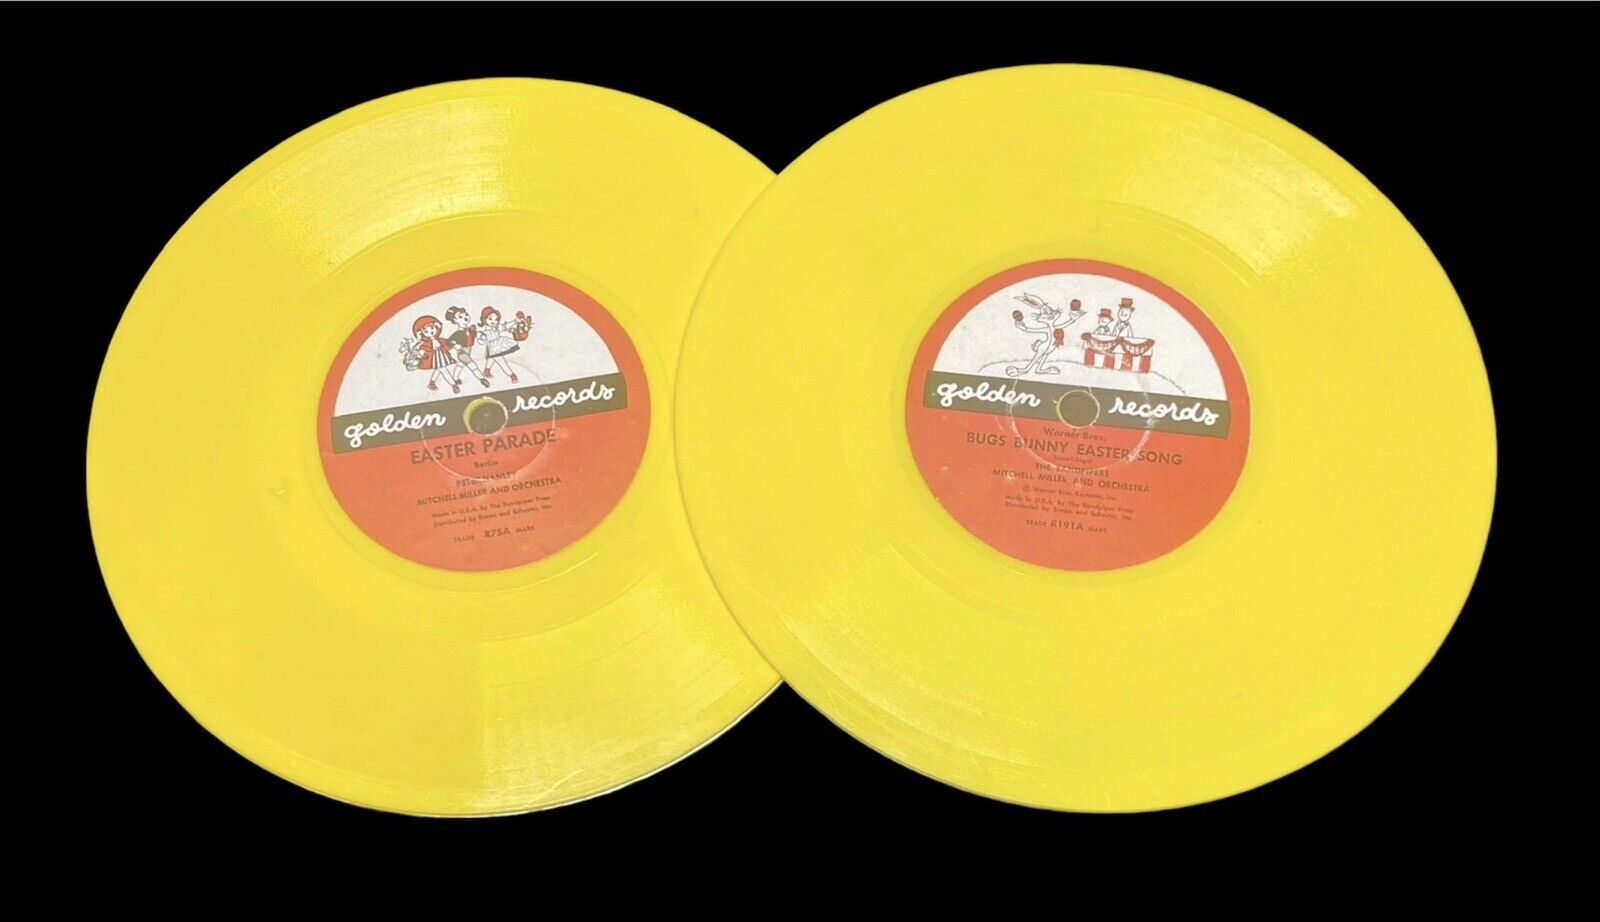 Vintage Golden Records (2)- Easter Parade (1952) & Bugs Bunny Easter Song (1955)